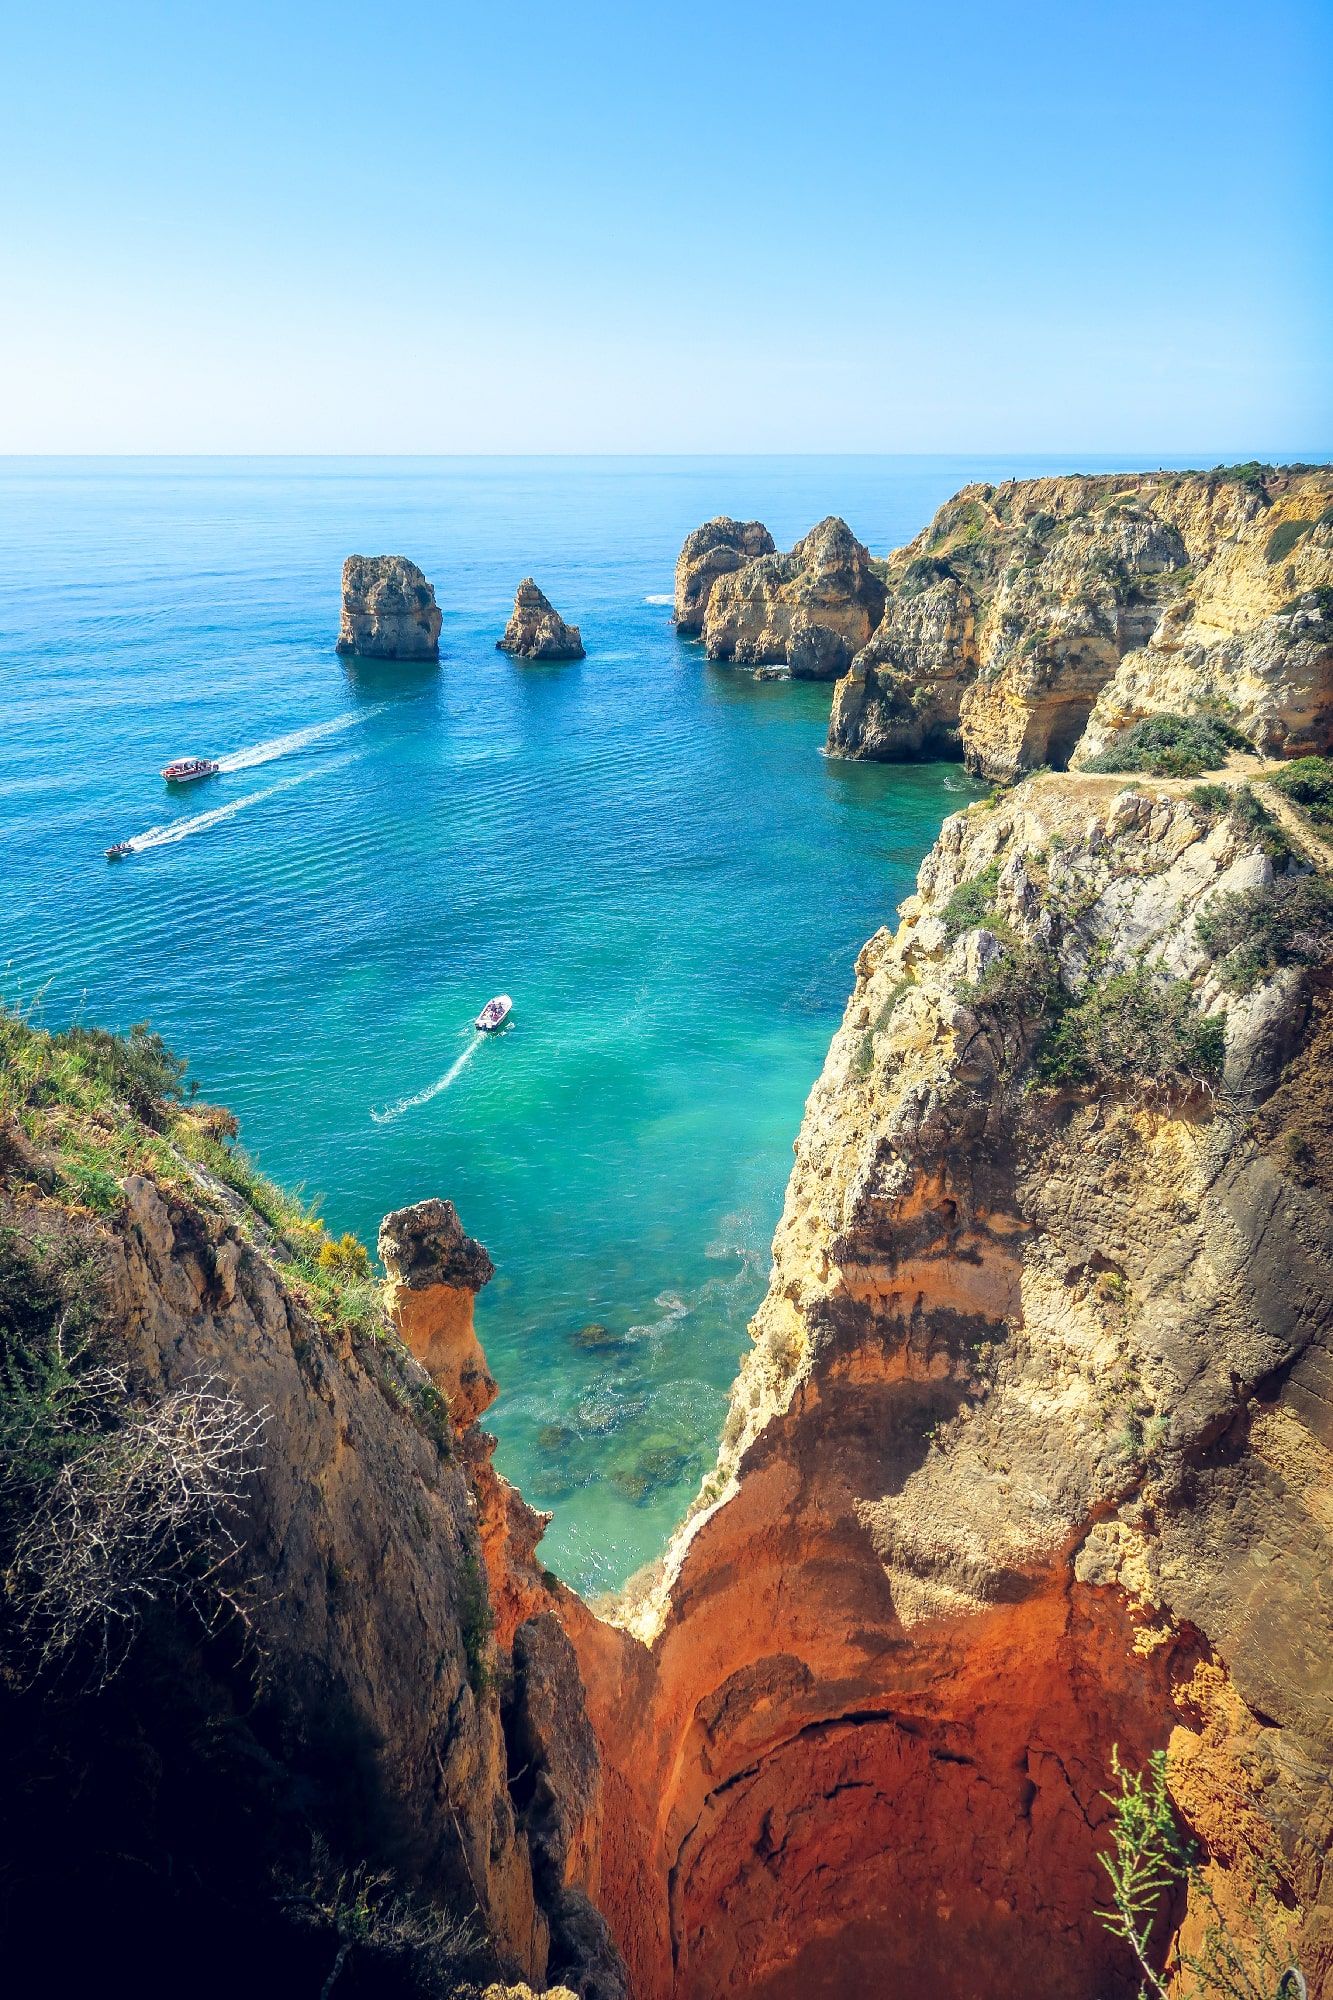 The Algarve, Portugal’s southernmost region known for its Atlantic beaches